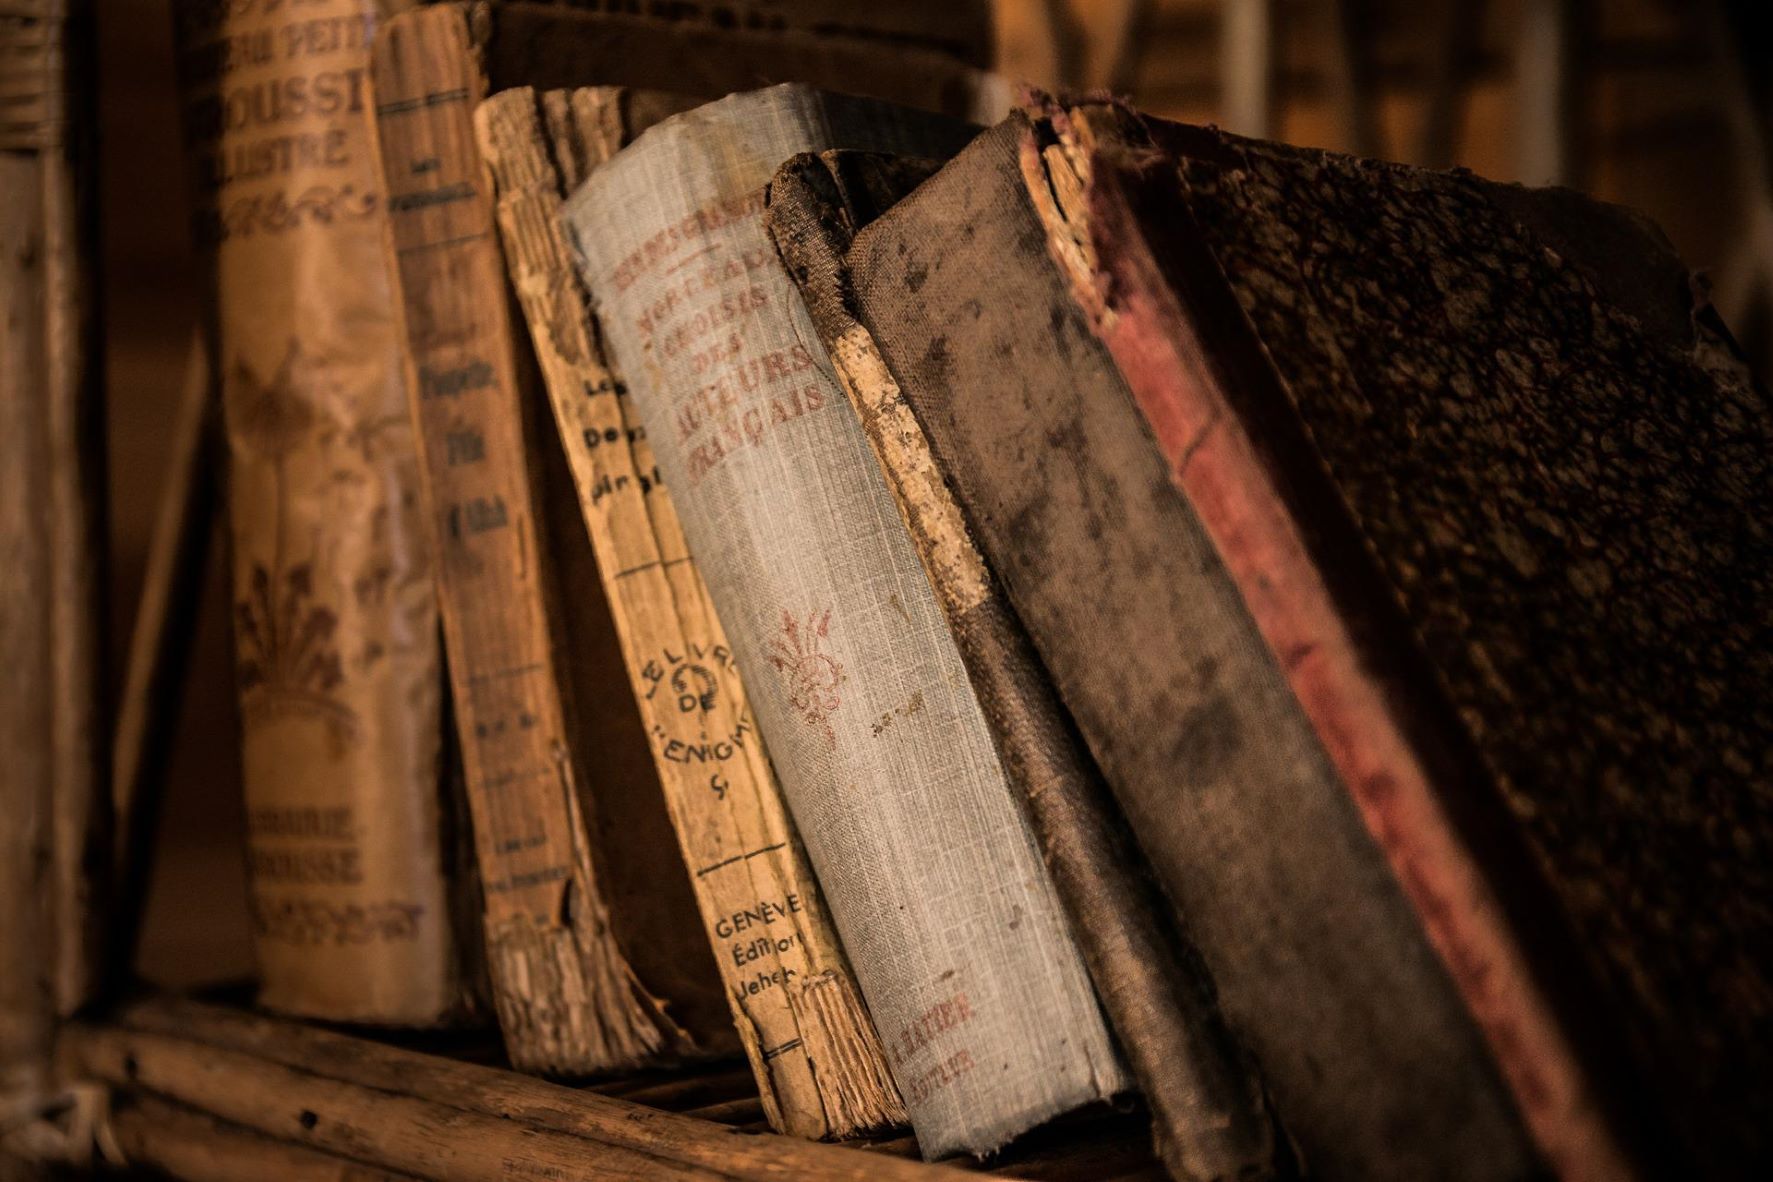 Aged and worn books on a shelf.